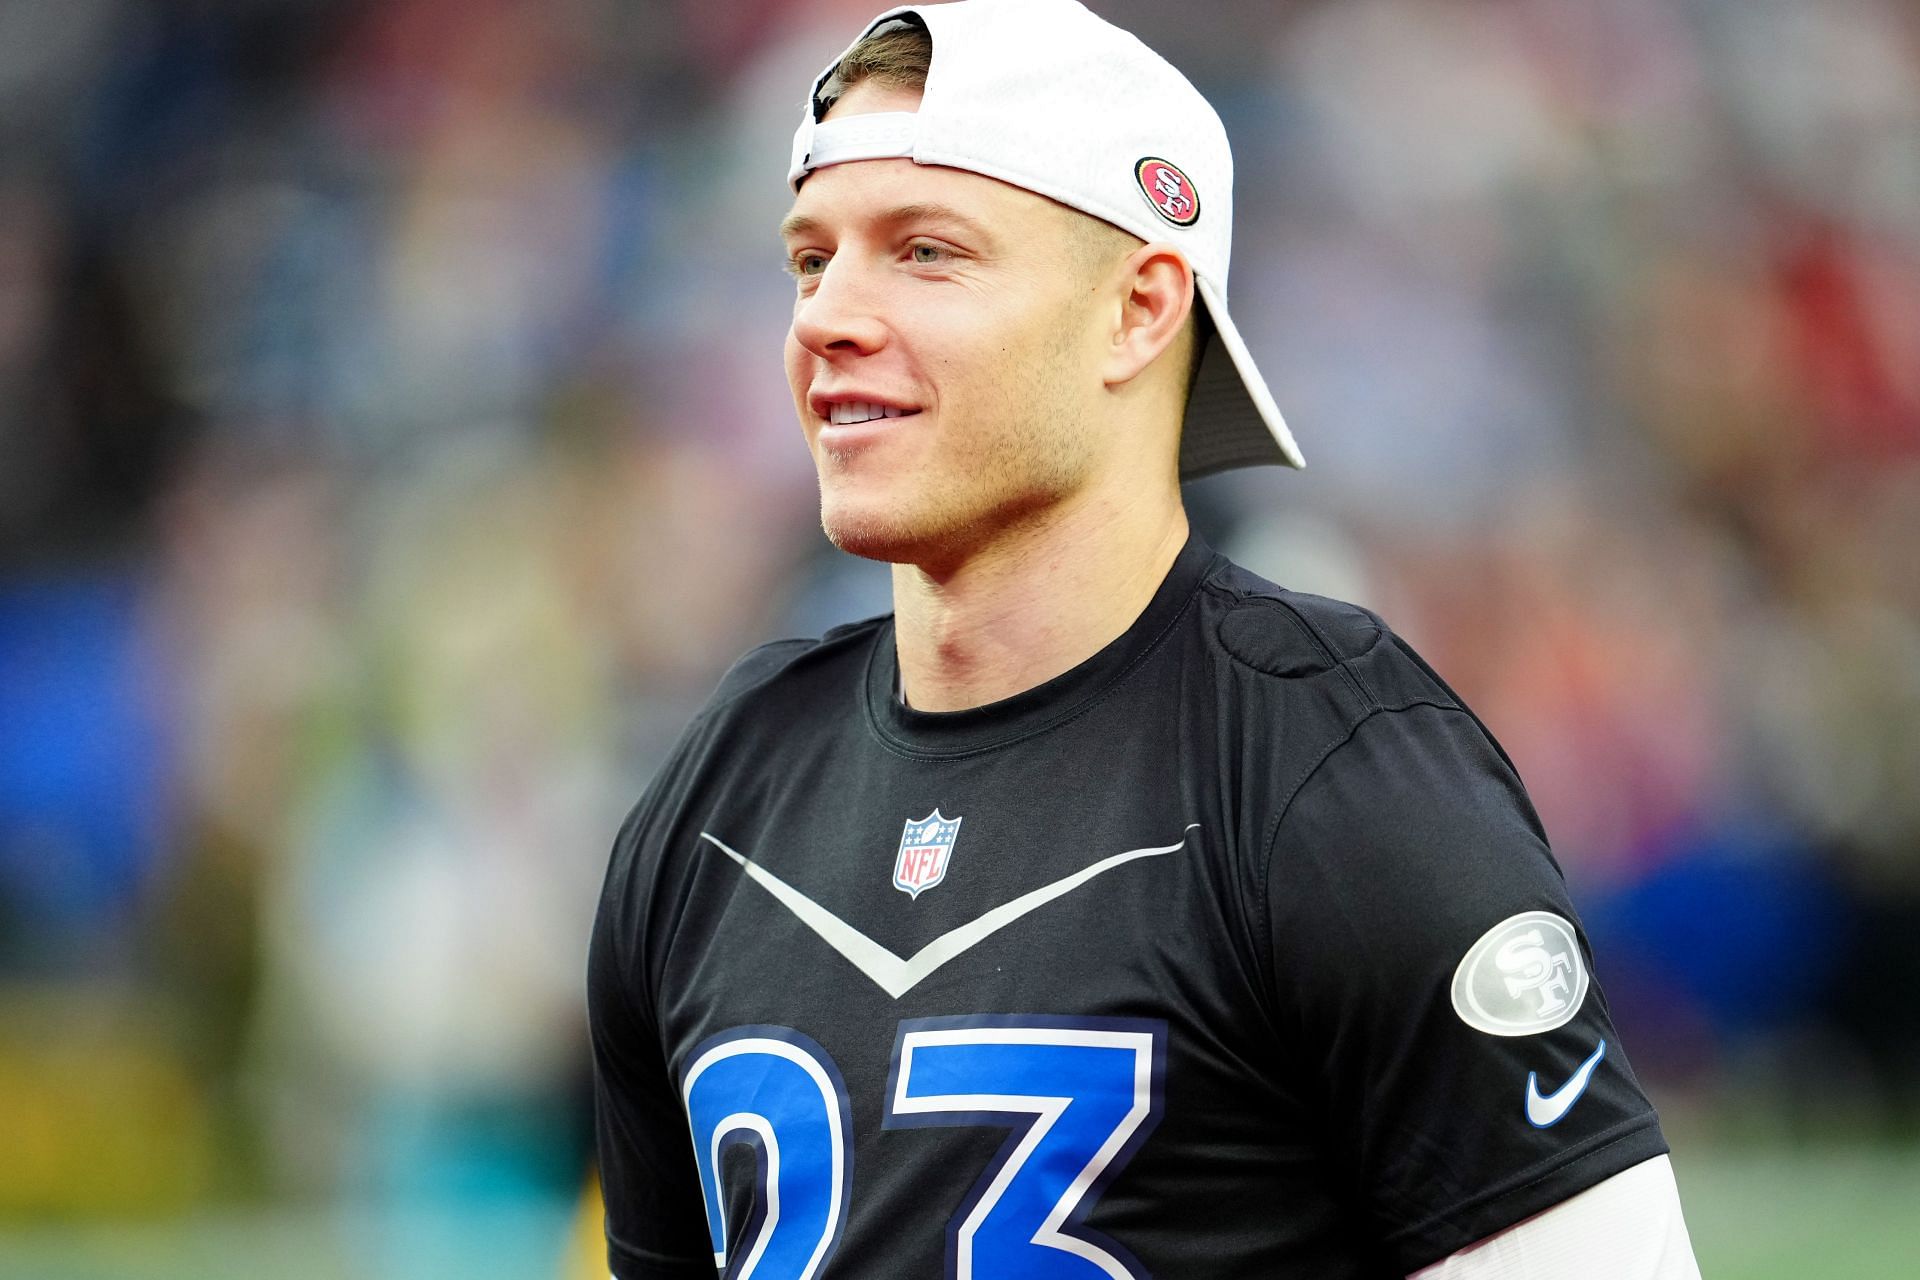 Christian McCaffrey joined the 49ers in a midseason trade